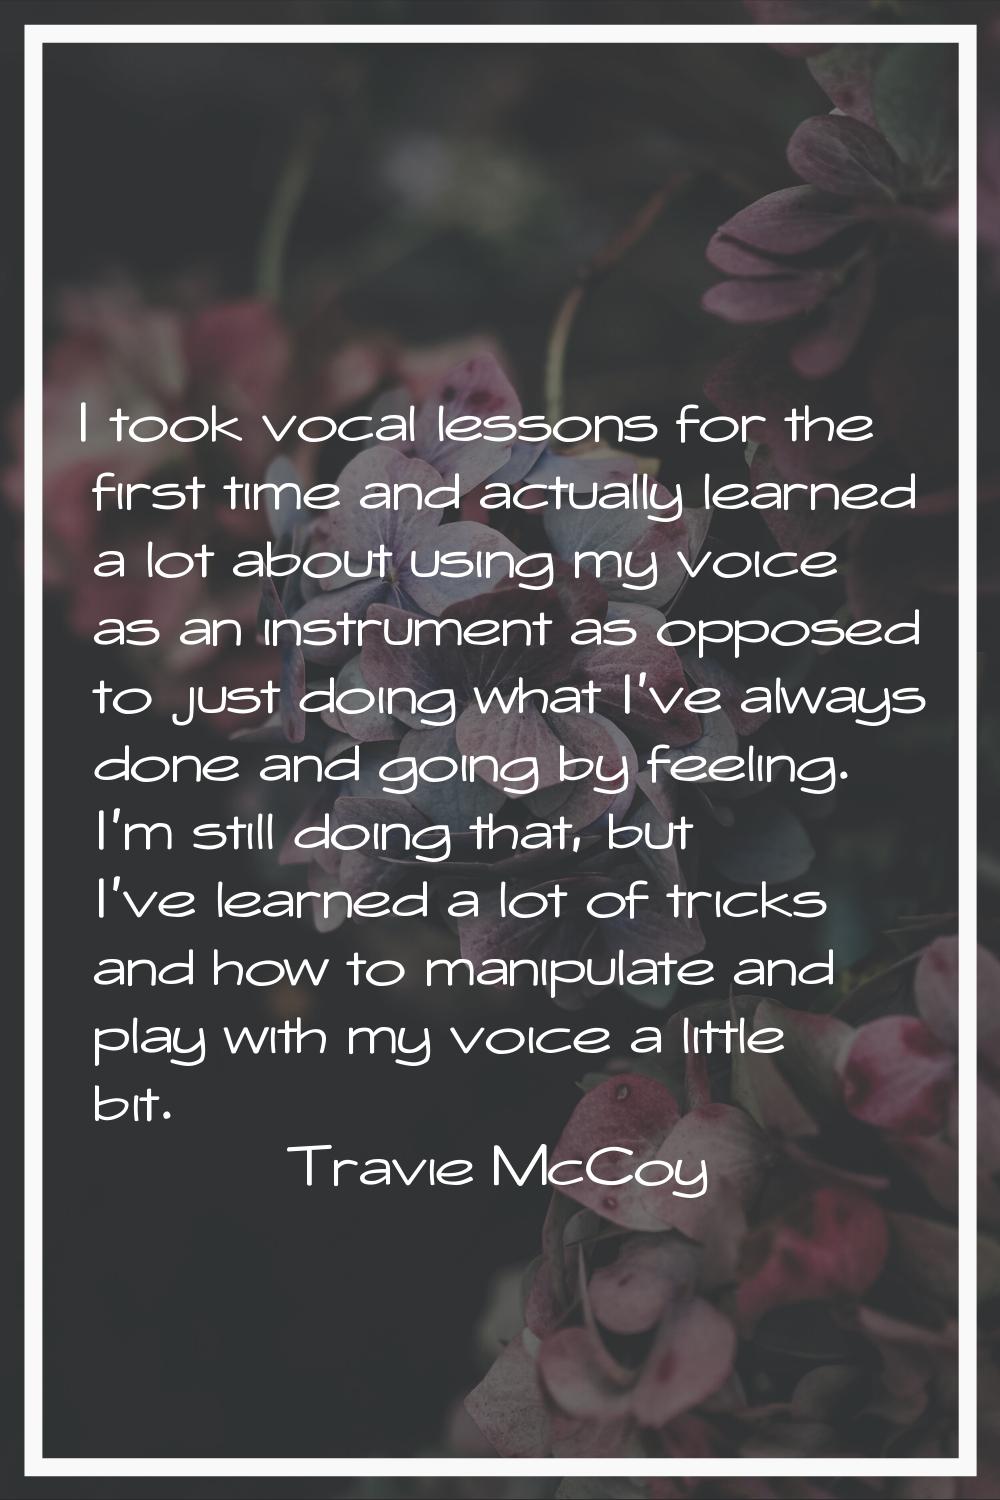 I took vocal lessons for the first time and actually learned a lot about using my voice as an instr